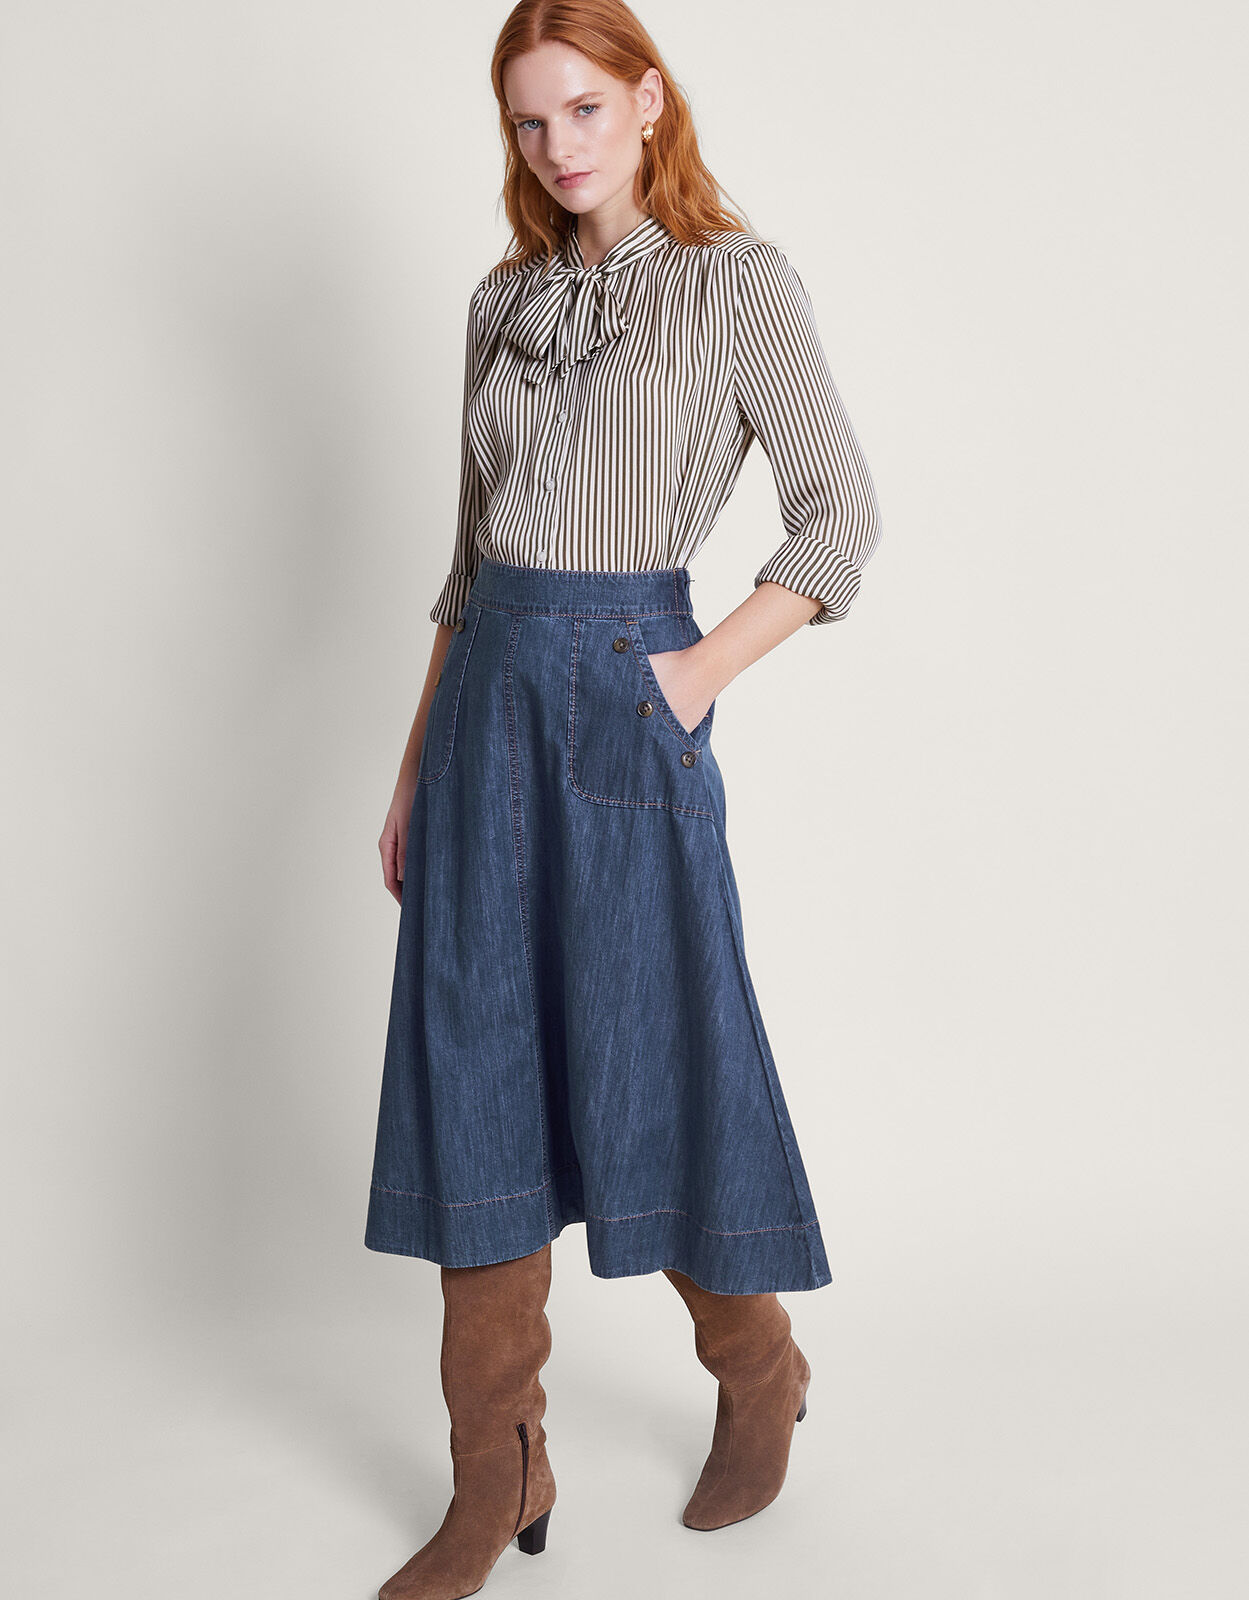 Denim Skirts for Women Over 50: How to Style - 50 IS NOT OLD - A Fashion  And Beauty Blog For Women Over 50